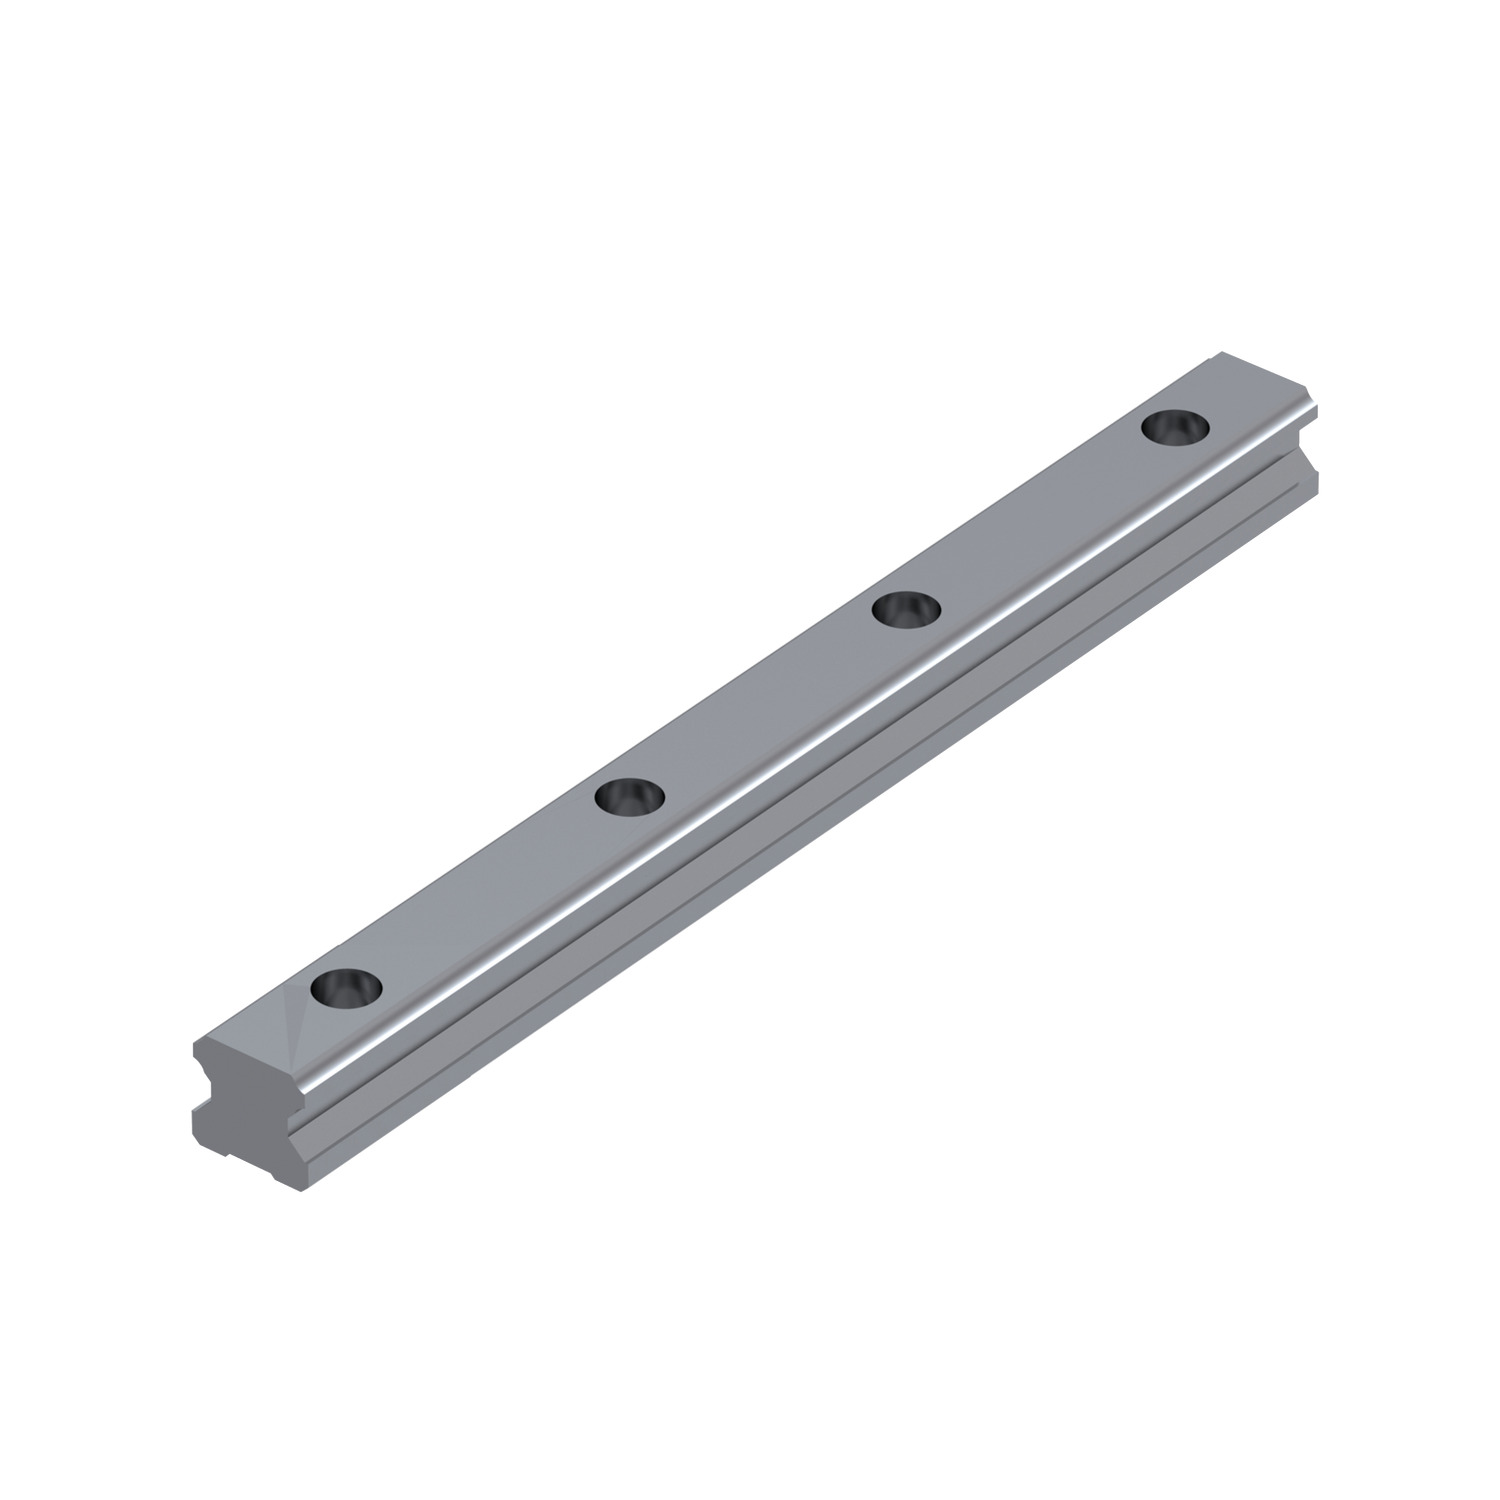 L1016.35-1240 Linear guide rail 35mm 1240 Hardened and ground steel. EC:20164966 WG:05063055291101